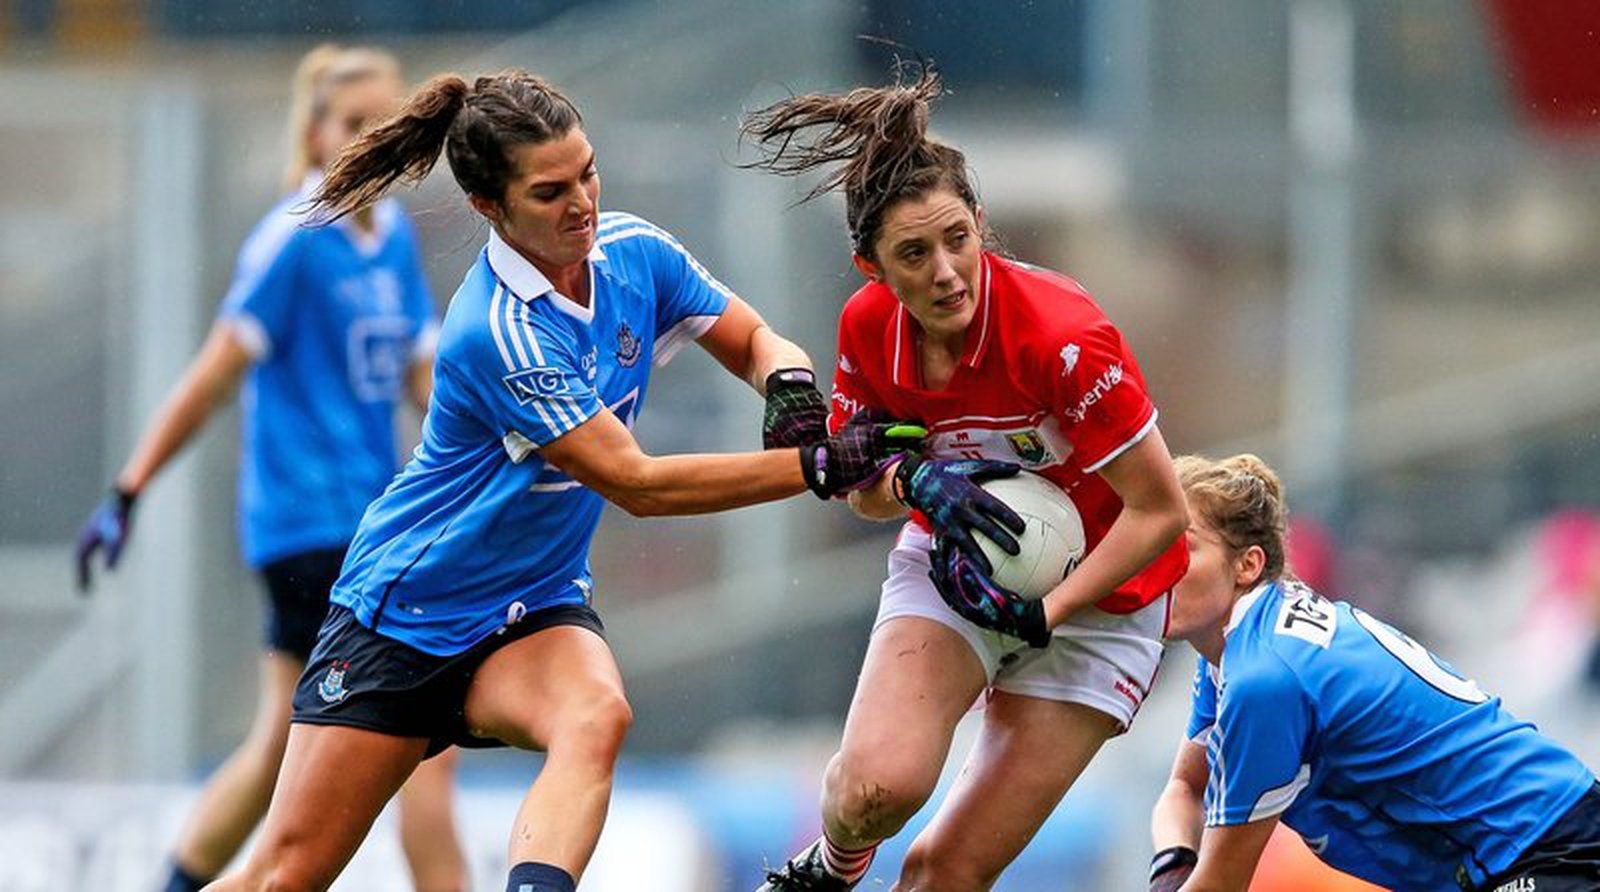 'Free to air' designation for ladies' GAA finals